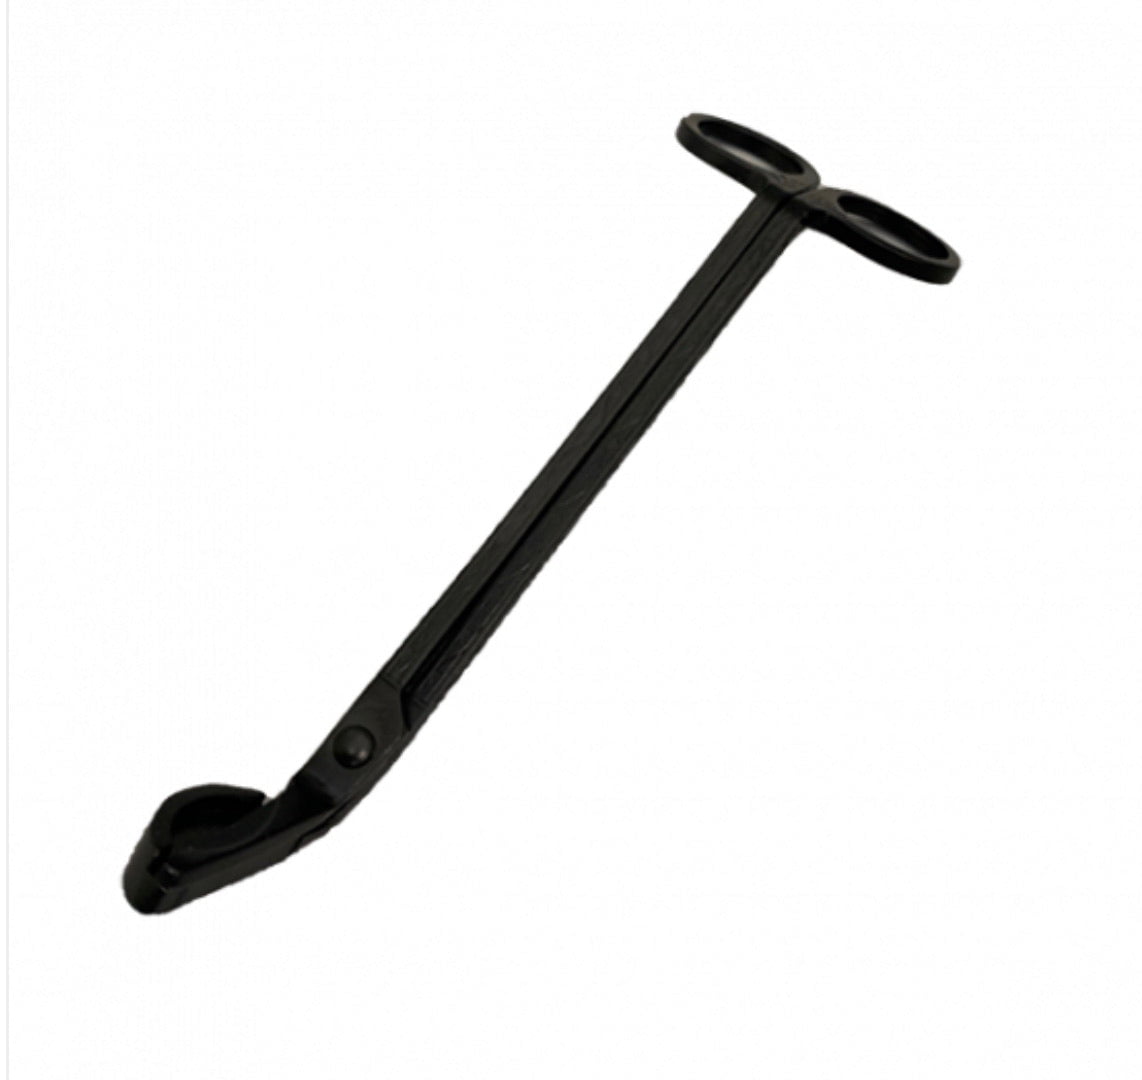 Matt black wick trimmer - $16.50 - The Essential Candle Co.